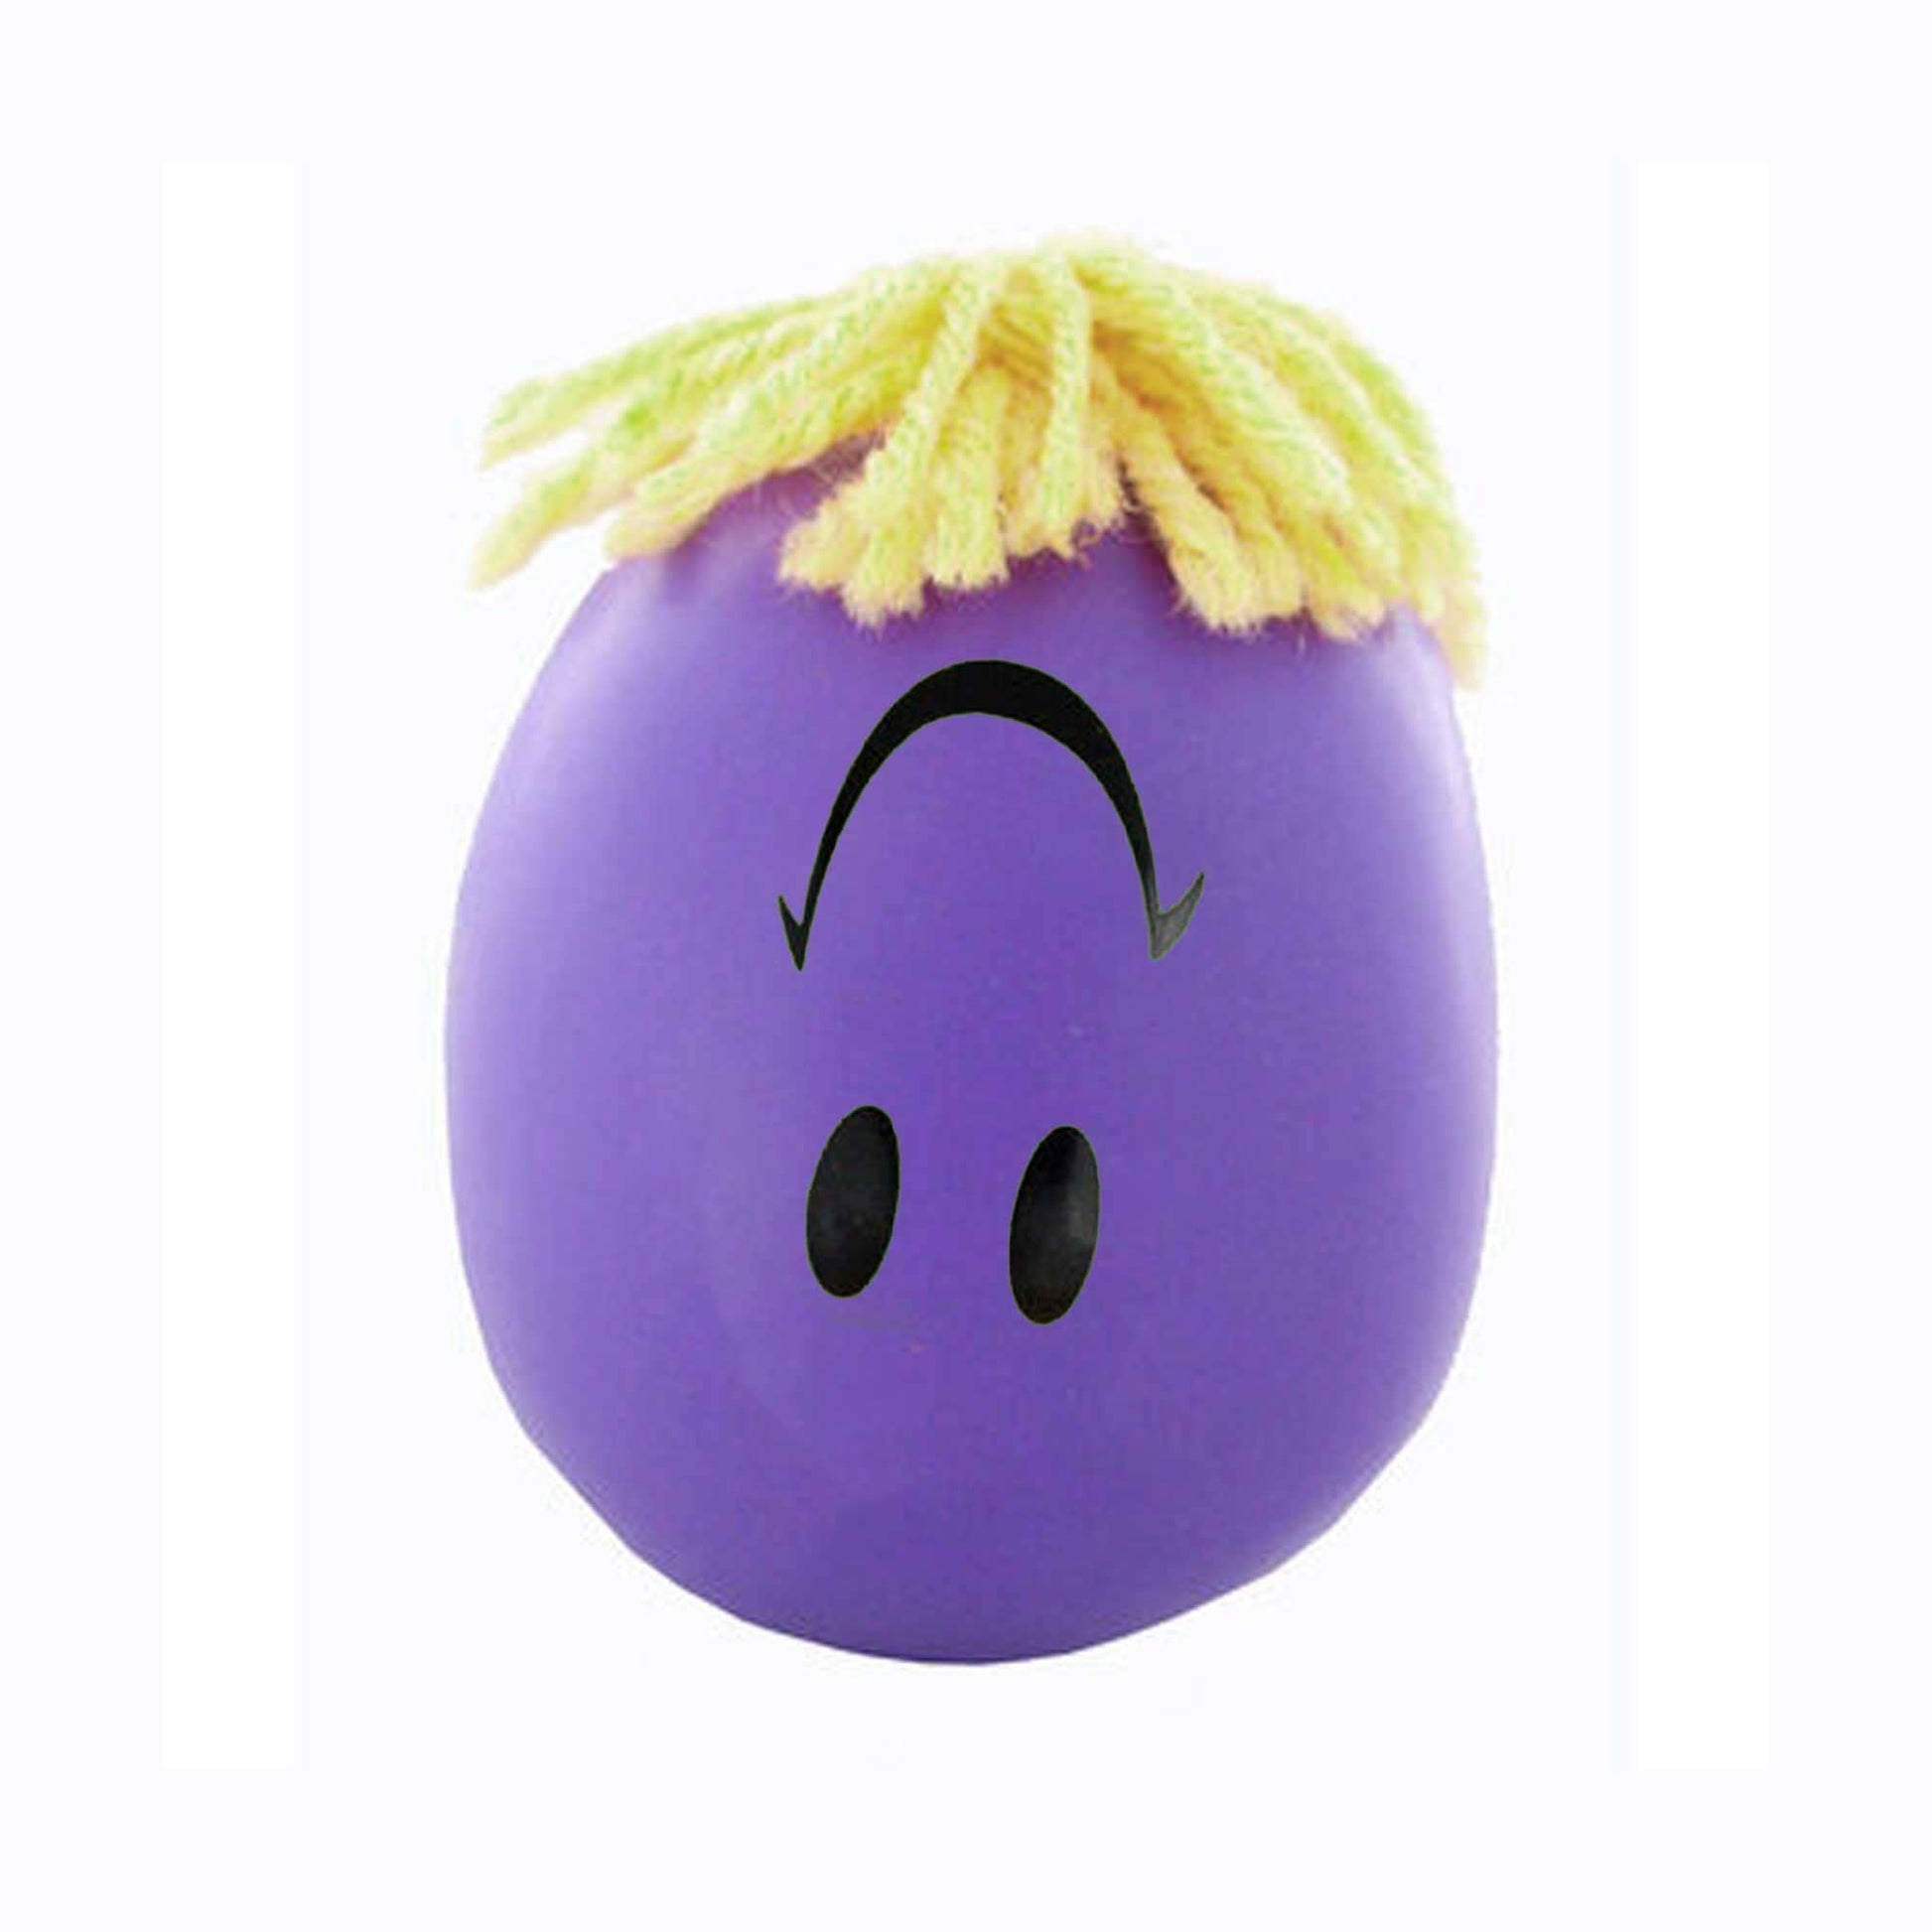 Kid's Moody Stress Relief Ball Face Anxiety Toy Toy SRL Purple 